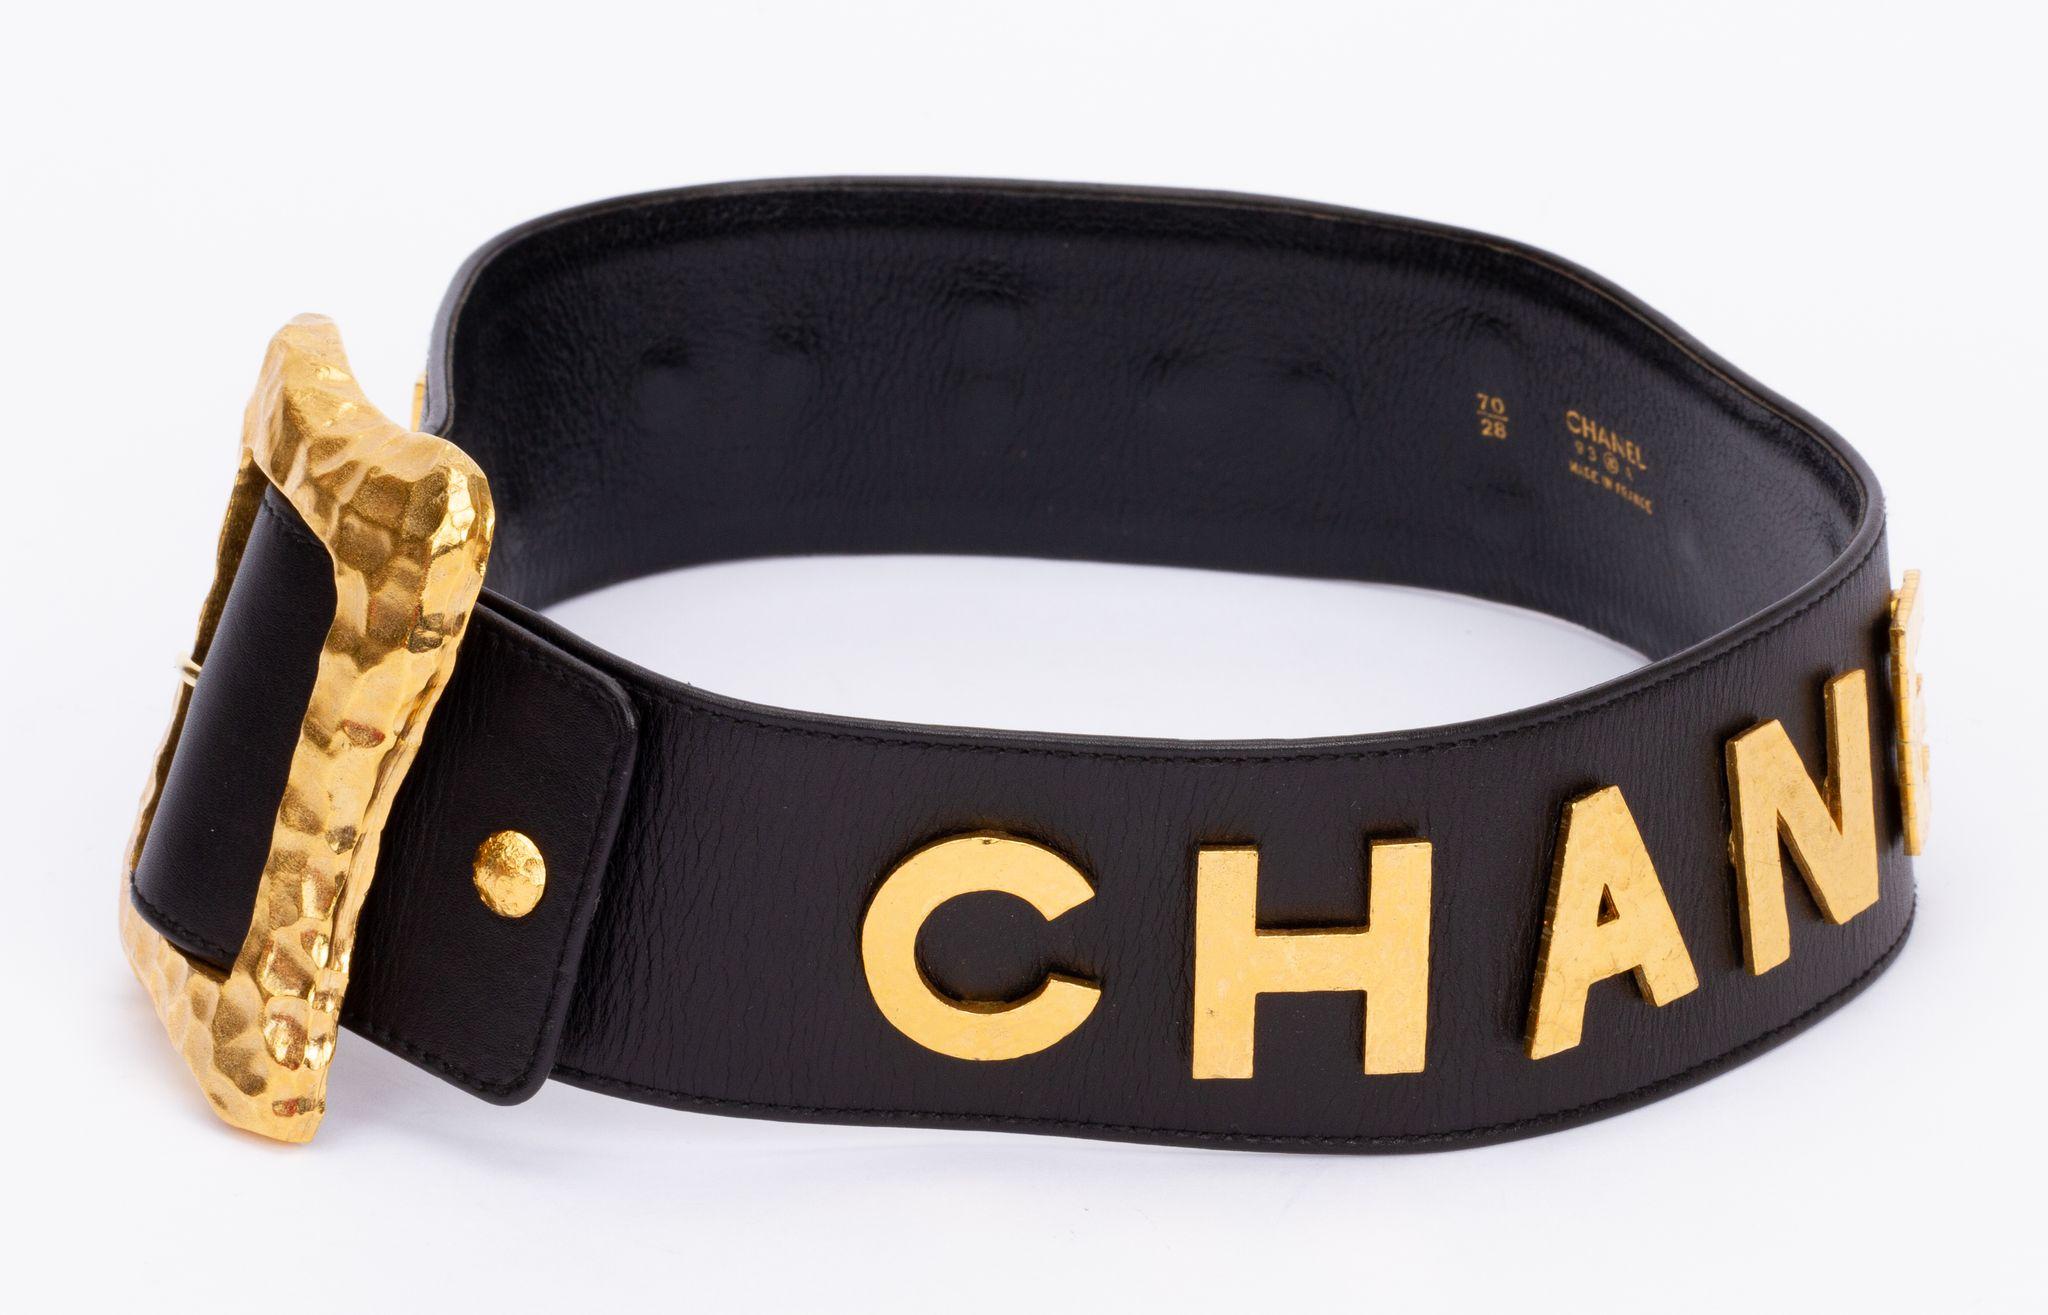 Chanel Rare Supermodel Black Gold Belt In Excellent Condition For Sale In West Hollywood, CA